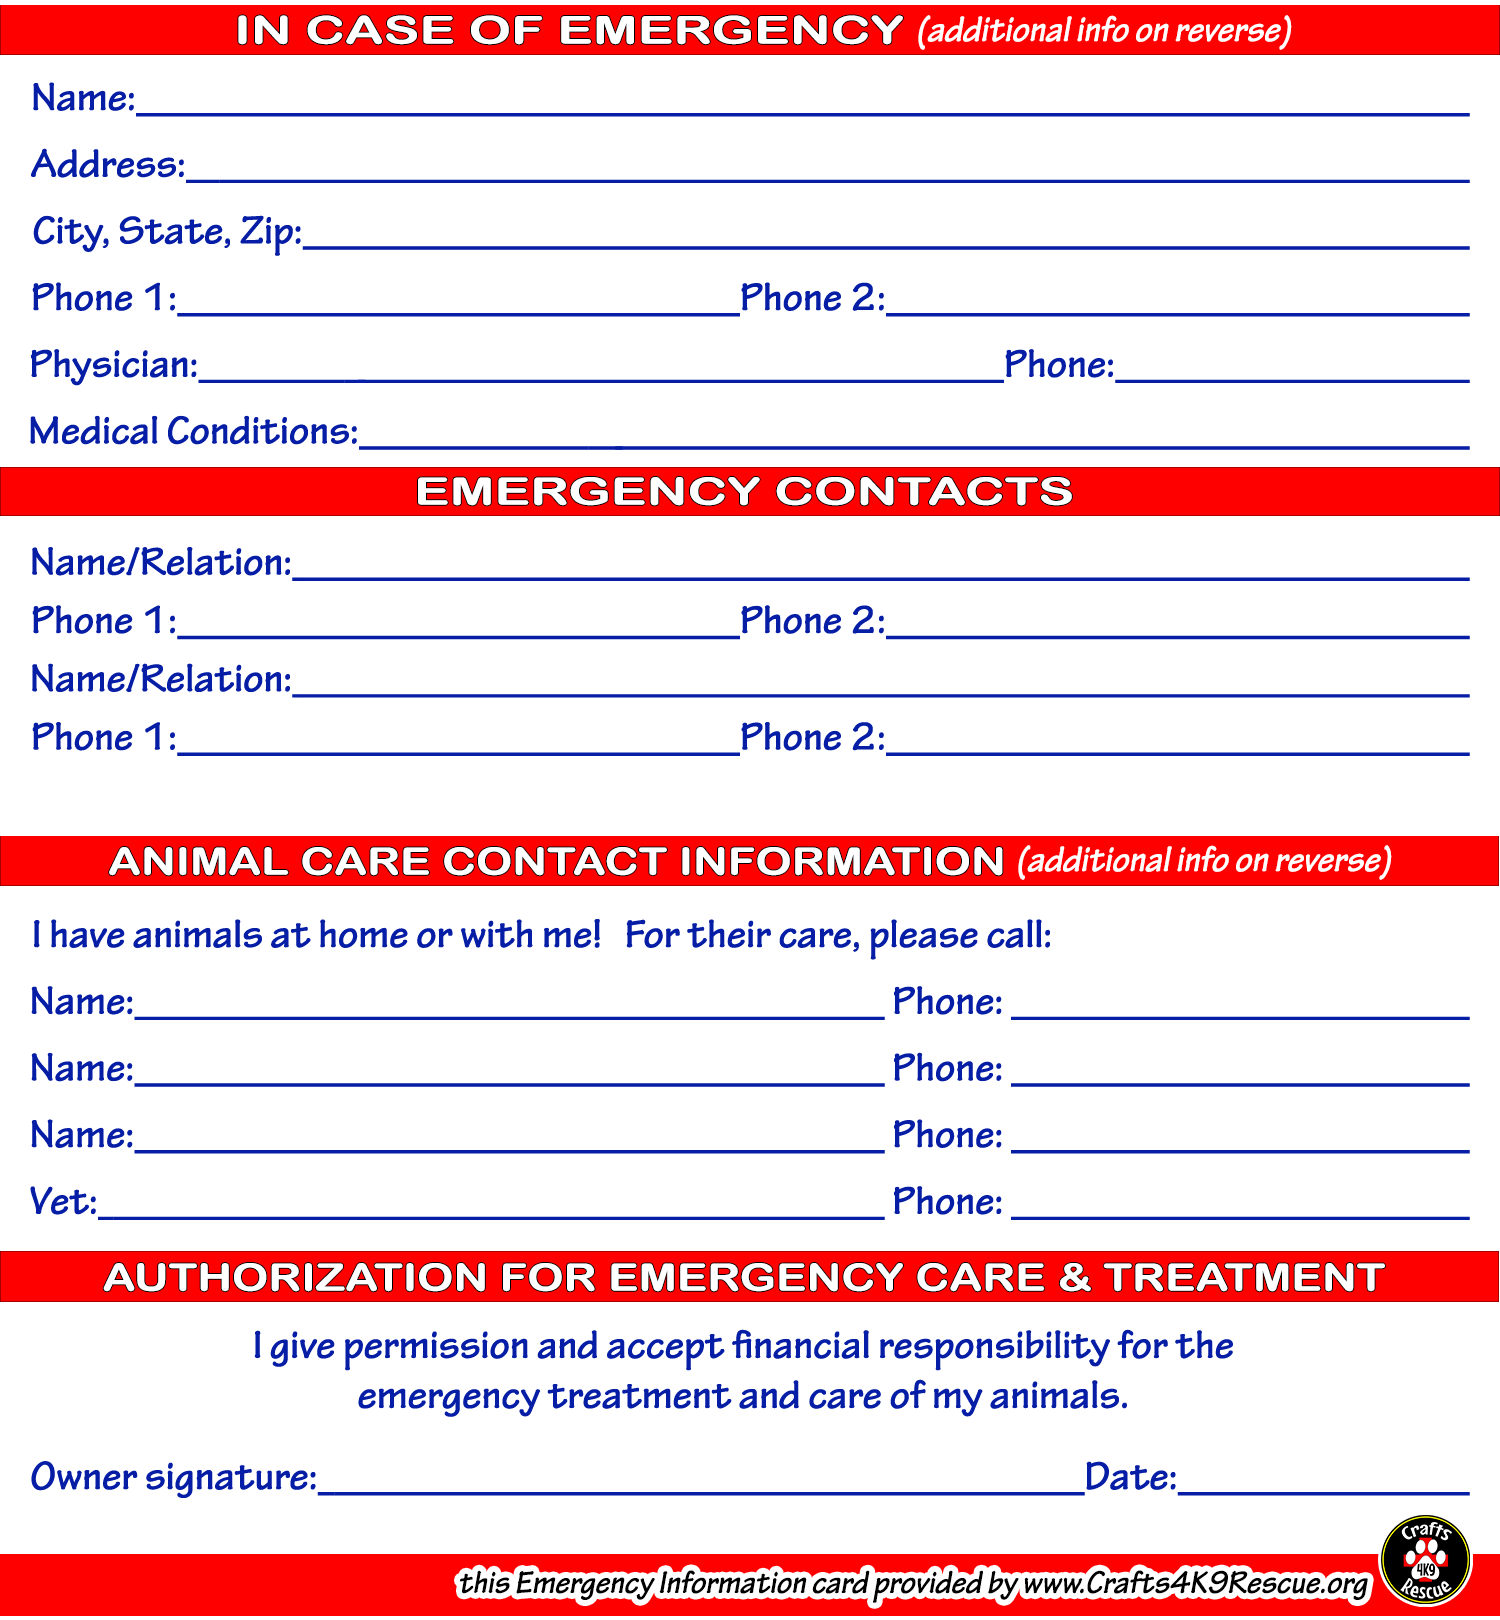 Emergency Information Card Template By Crafts4K9Rescue On 